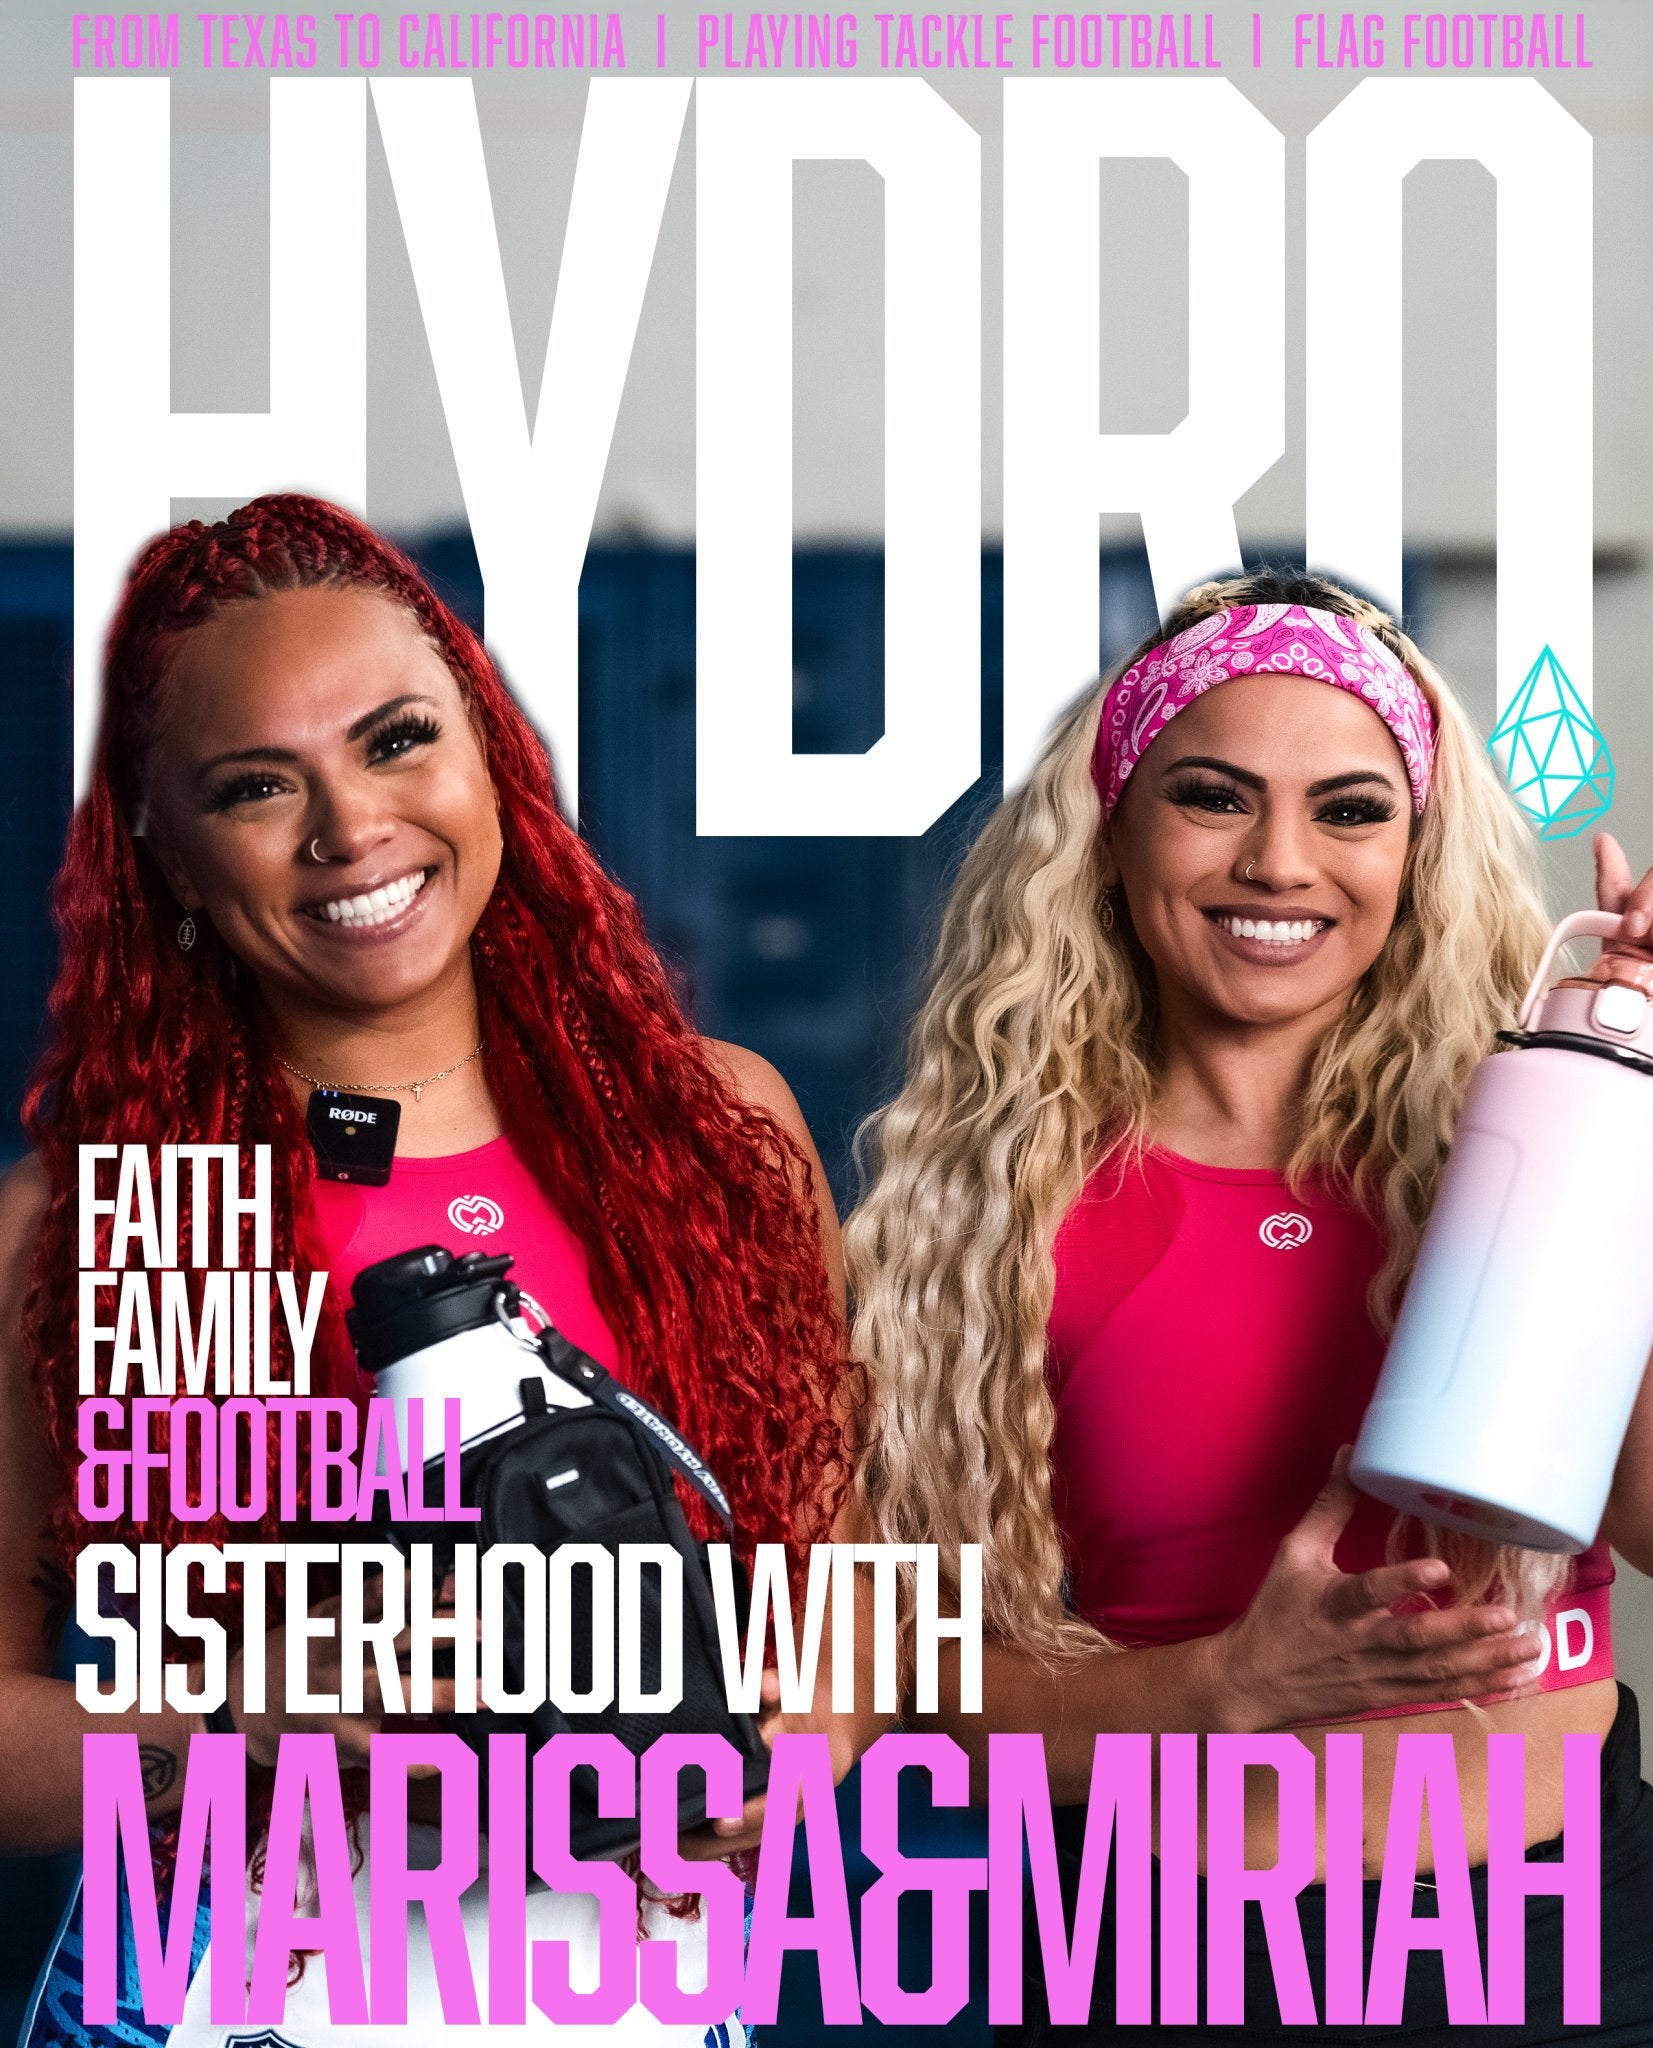 The Lopez Sisters: Empowering Women on and off the Field - HydroH2o